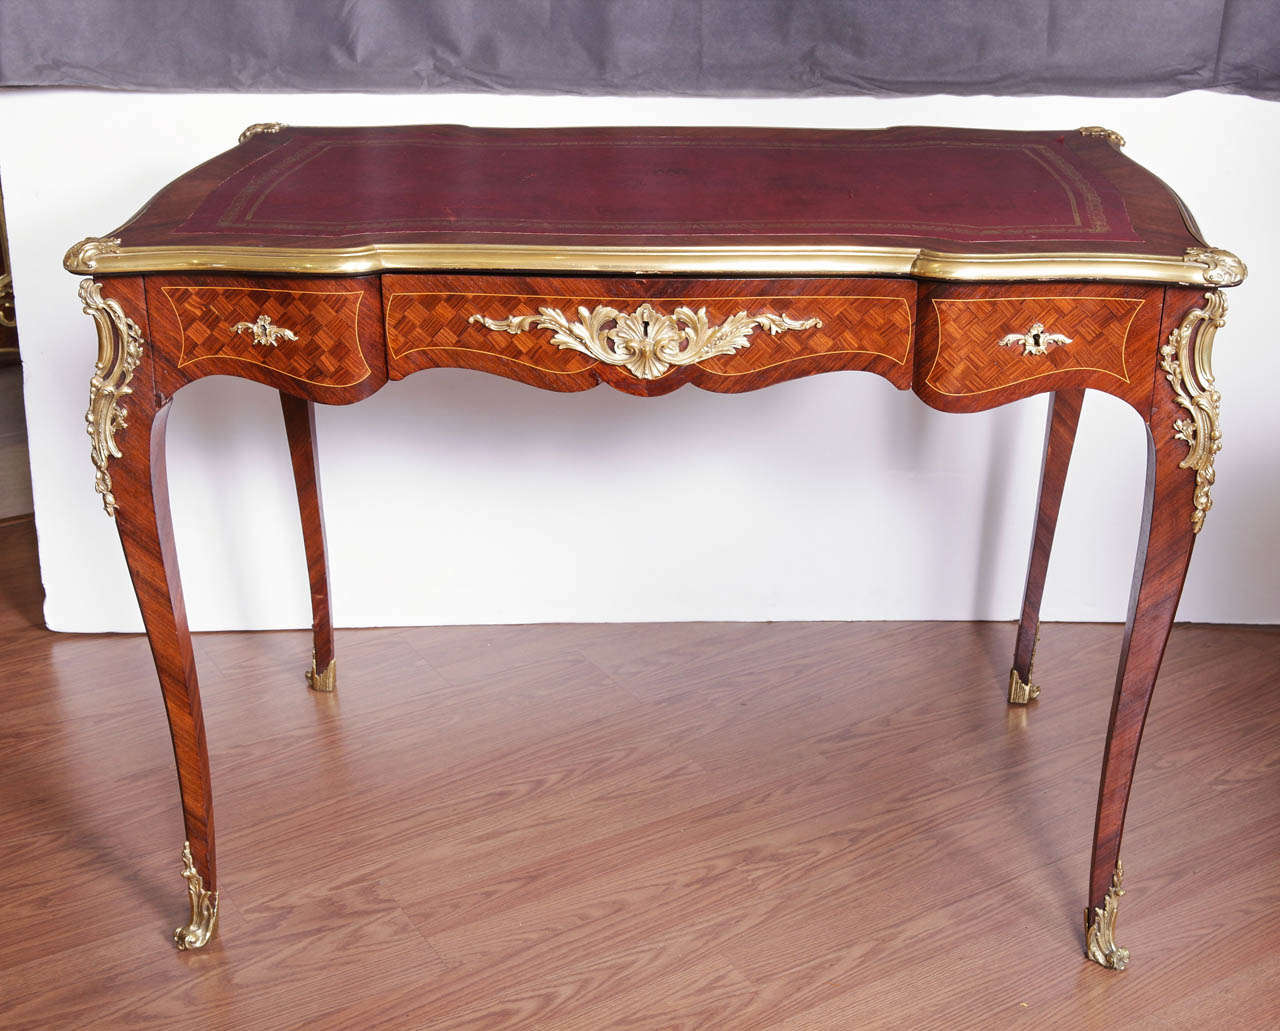 19th c Rosewood and Kingwood French Louis XV writing desk. Leather top surface